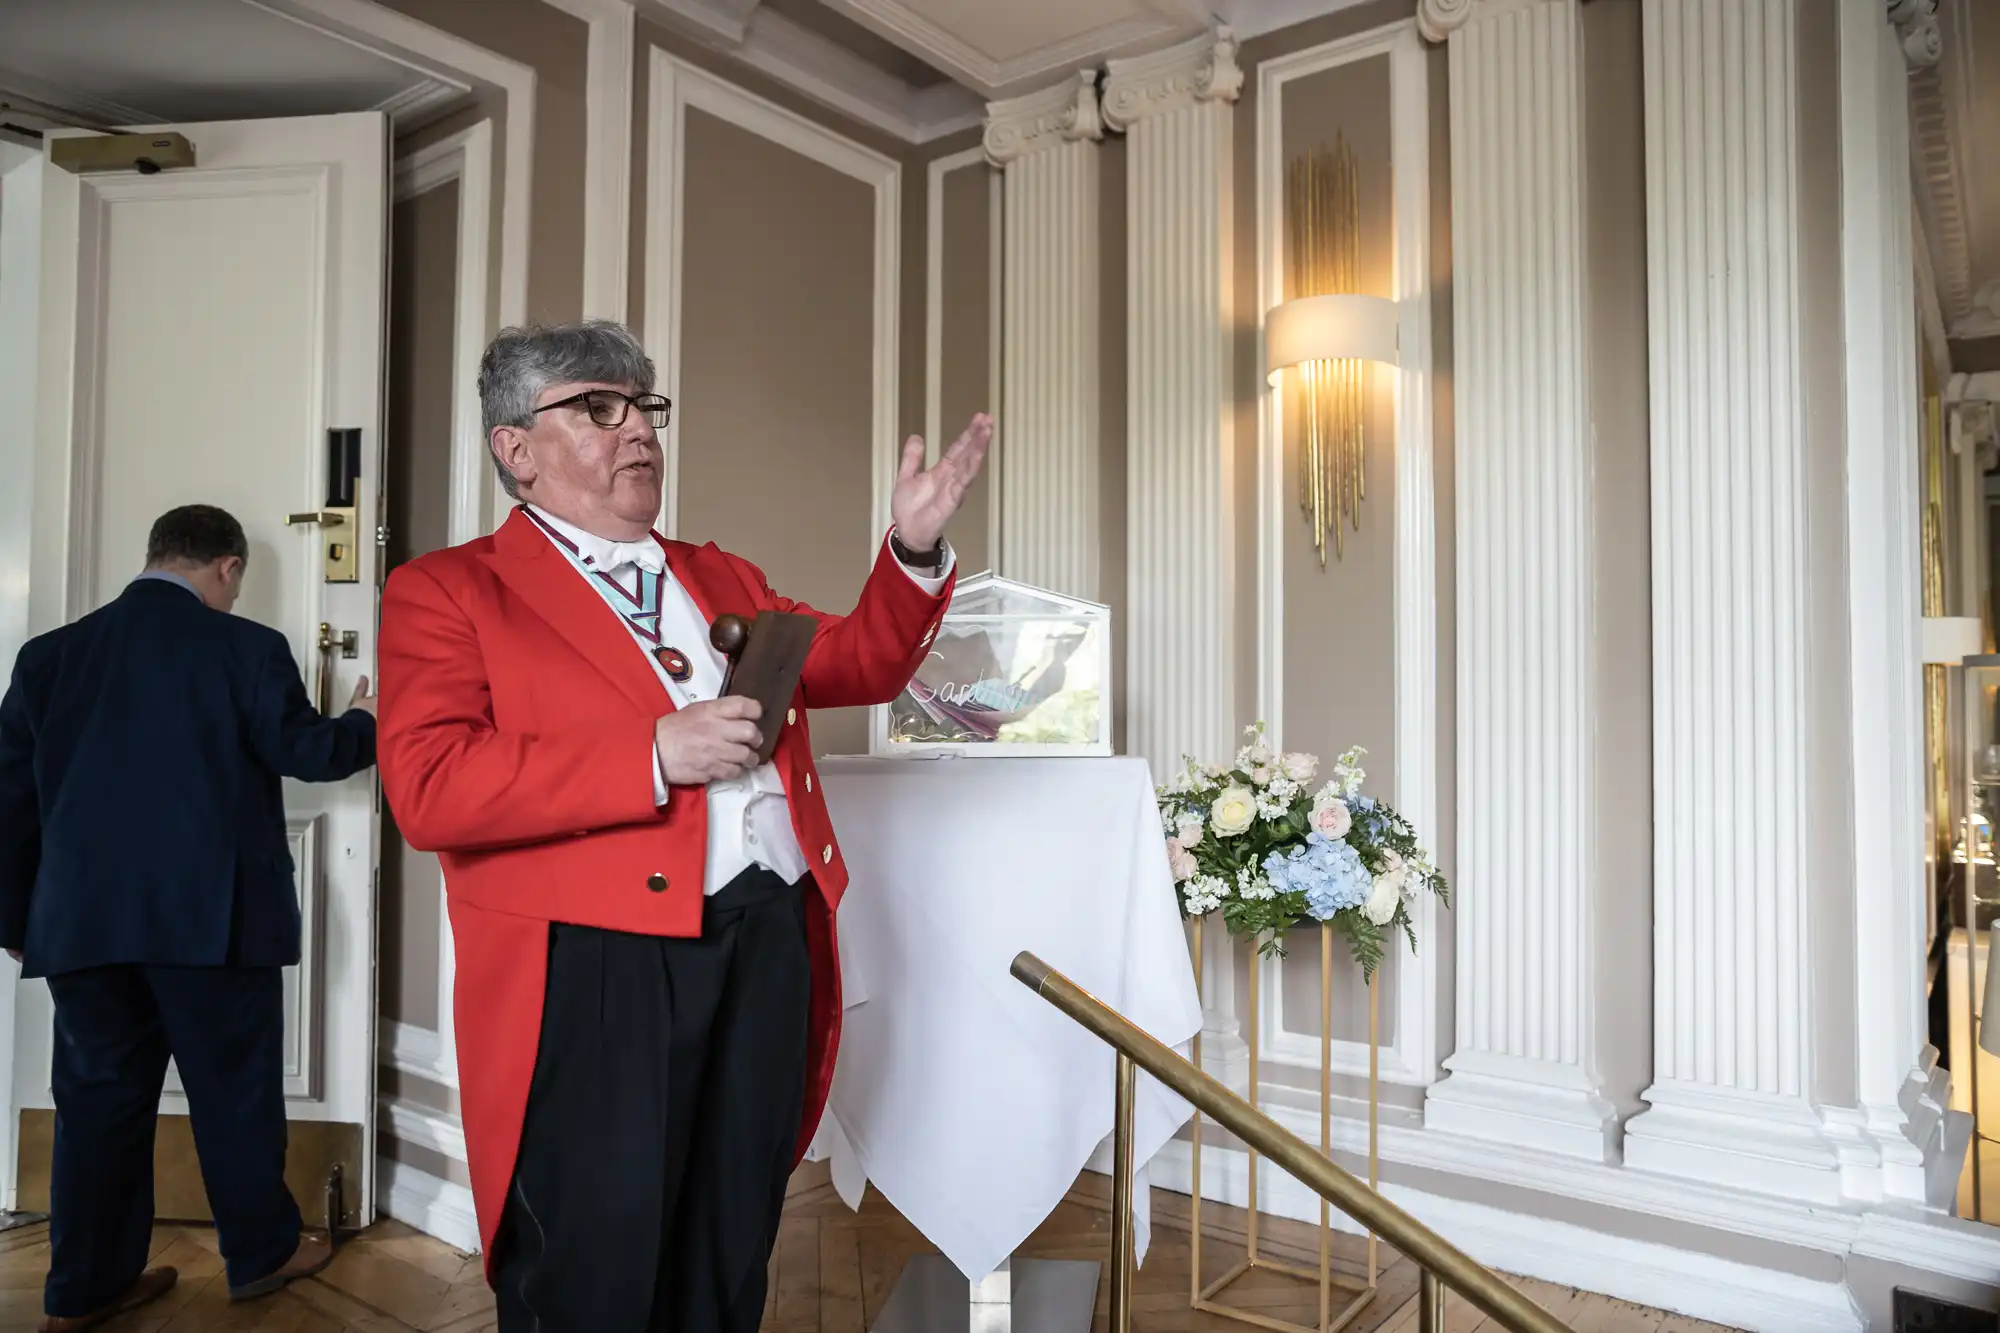 An older man with gray hair, wearing a red jacket and glasses, gestures while speaking in an elegant room with columns and chandeliers. Another man is partially visible in the background.